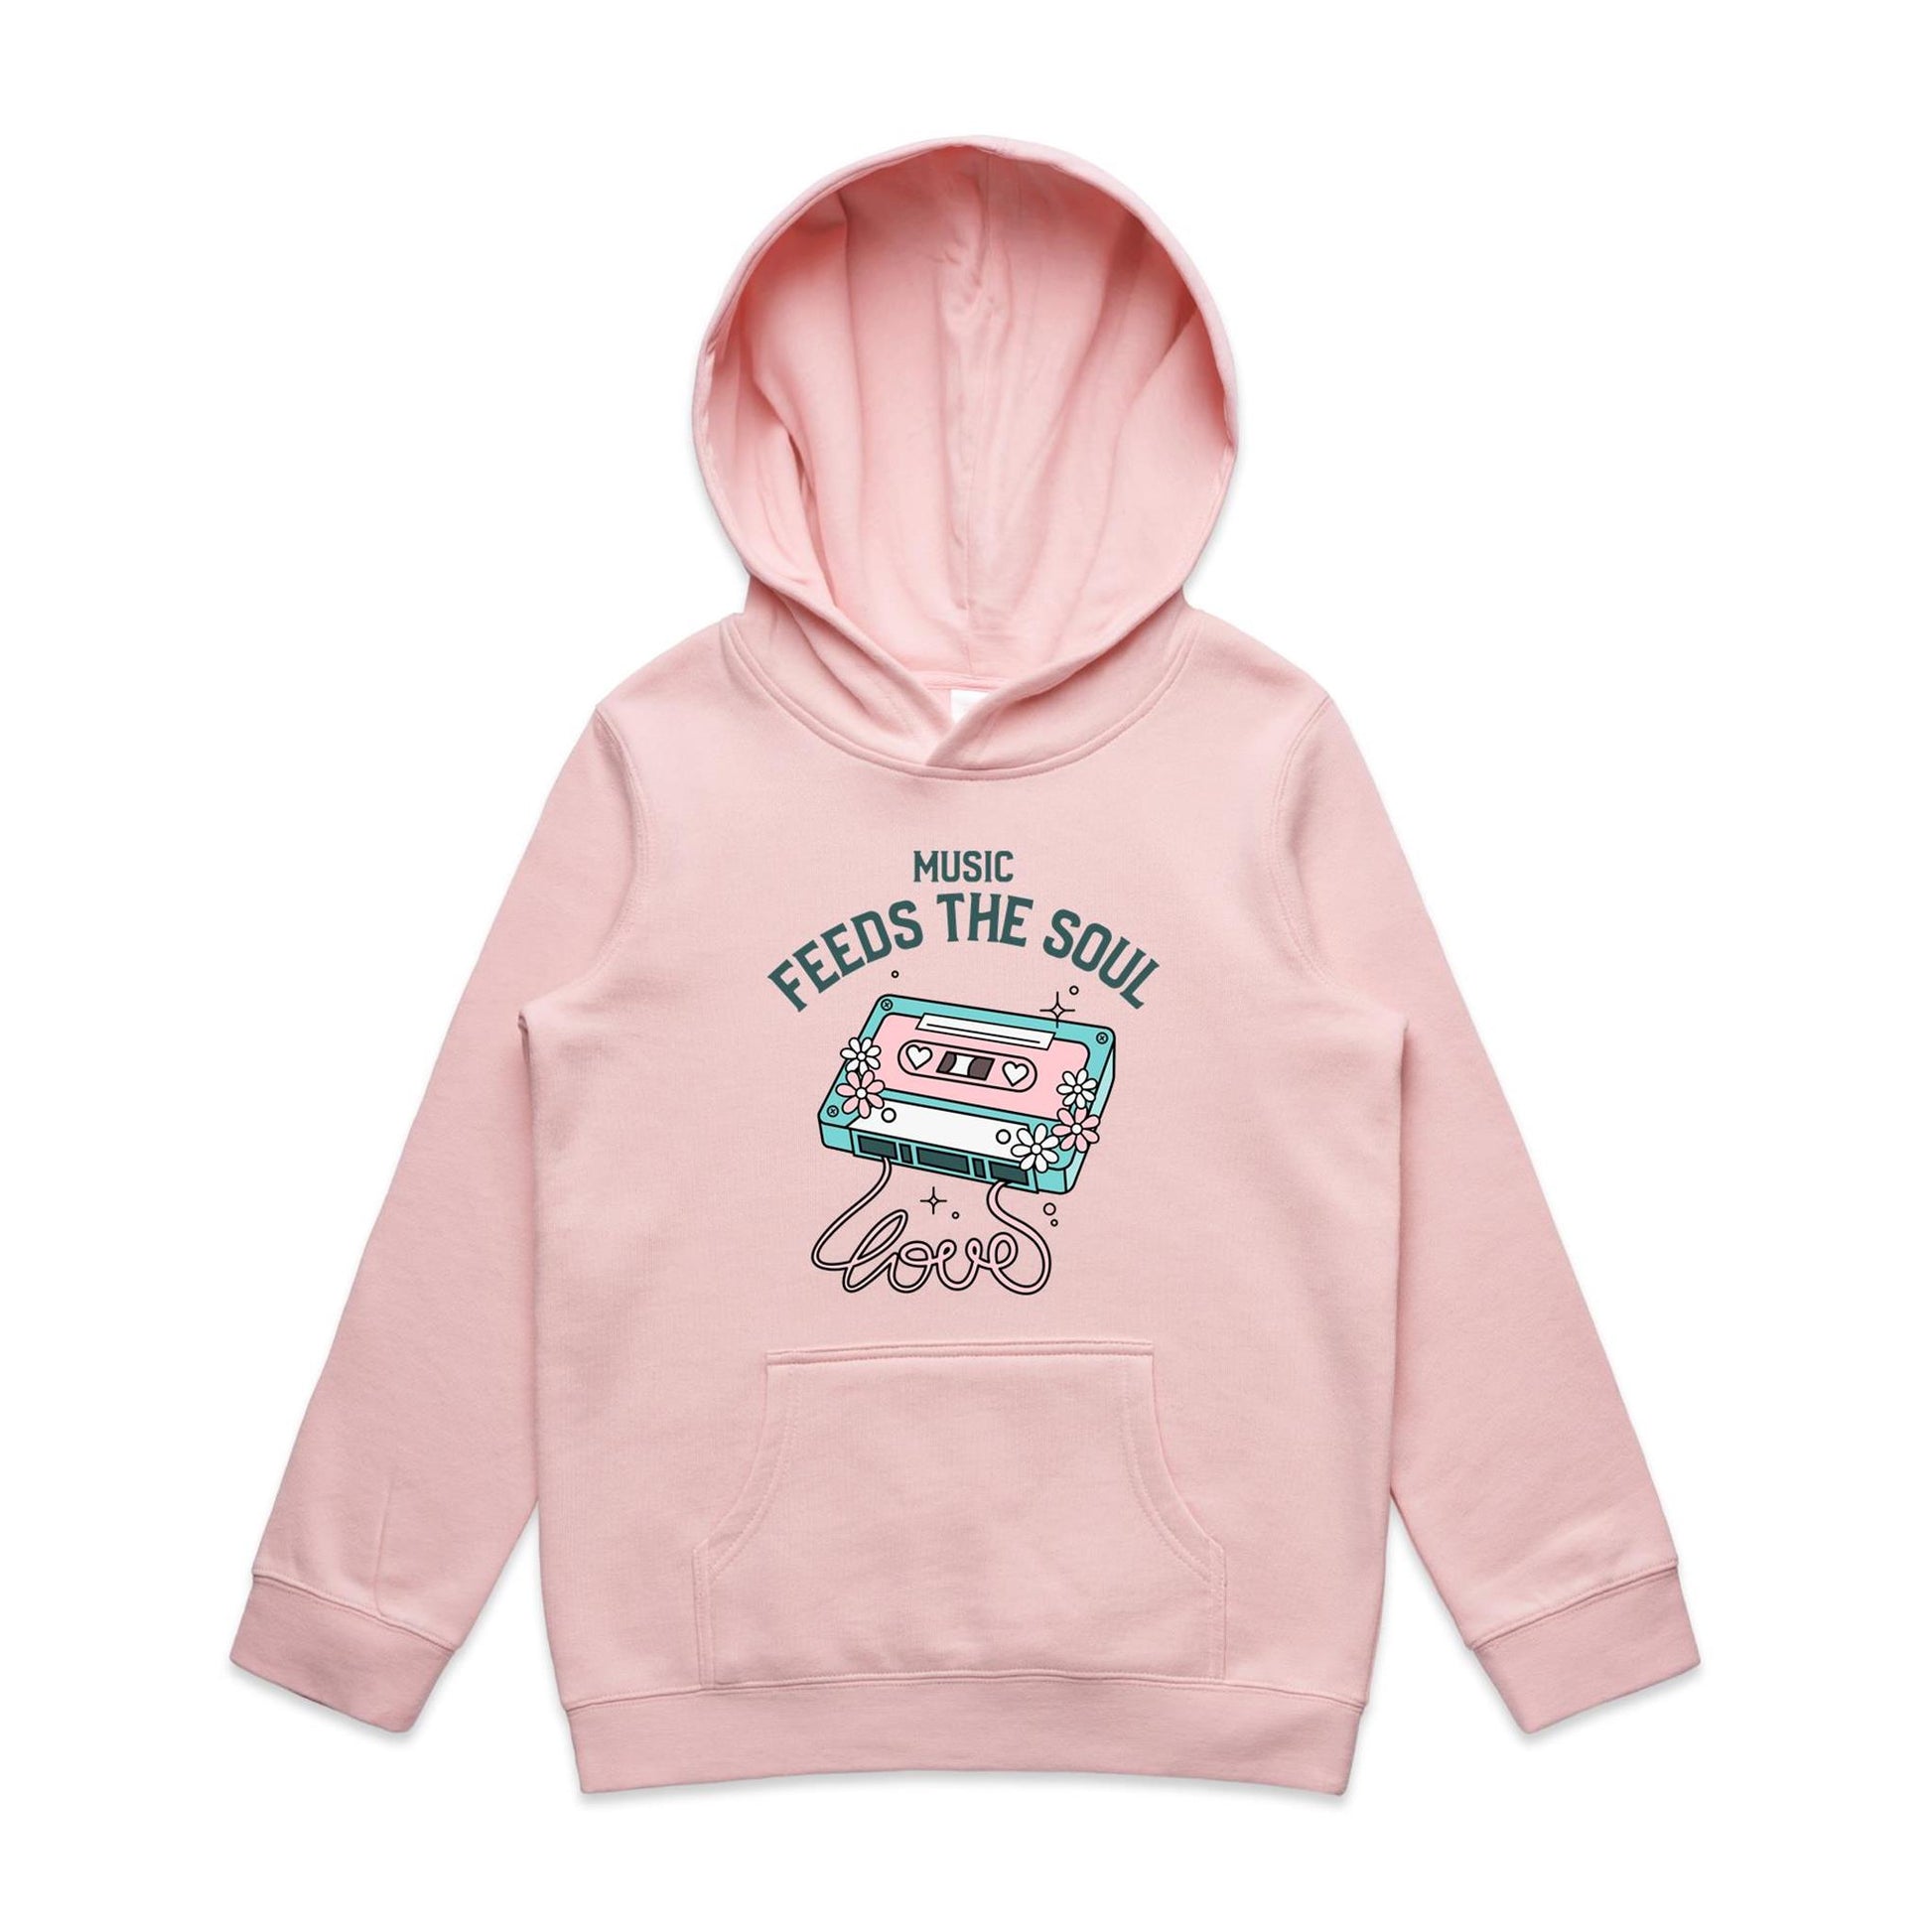 Music Feeds The Soul, Cassette Tape - Youth Supply Hood Pink Kids Hoodie Music Retro